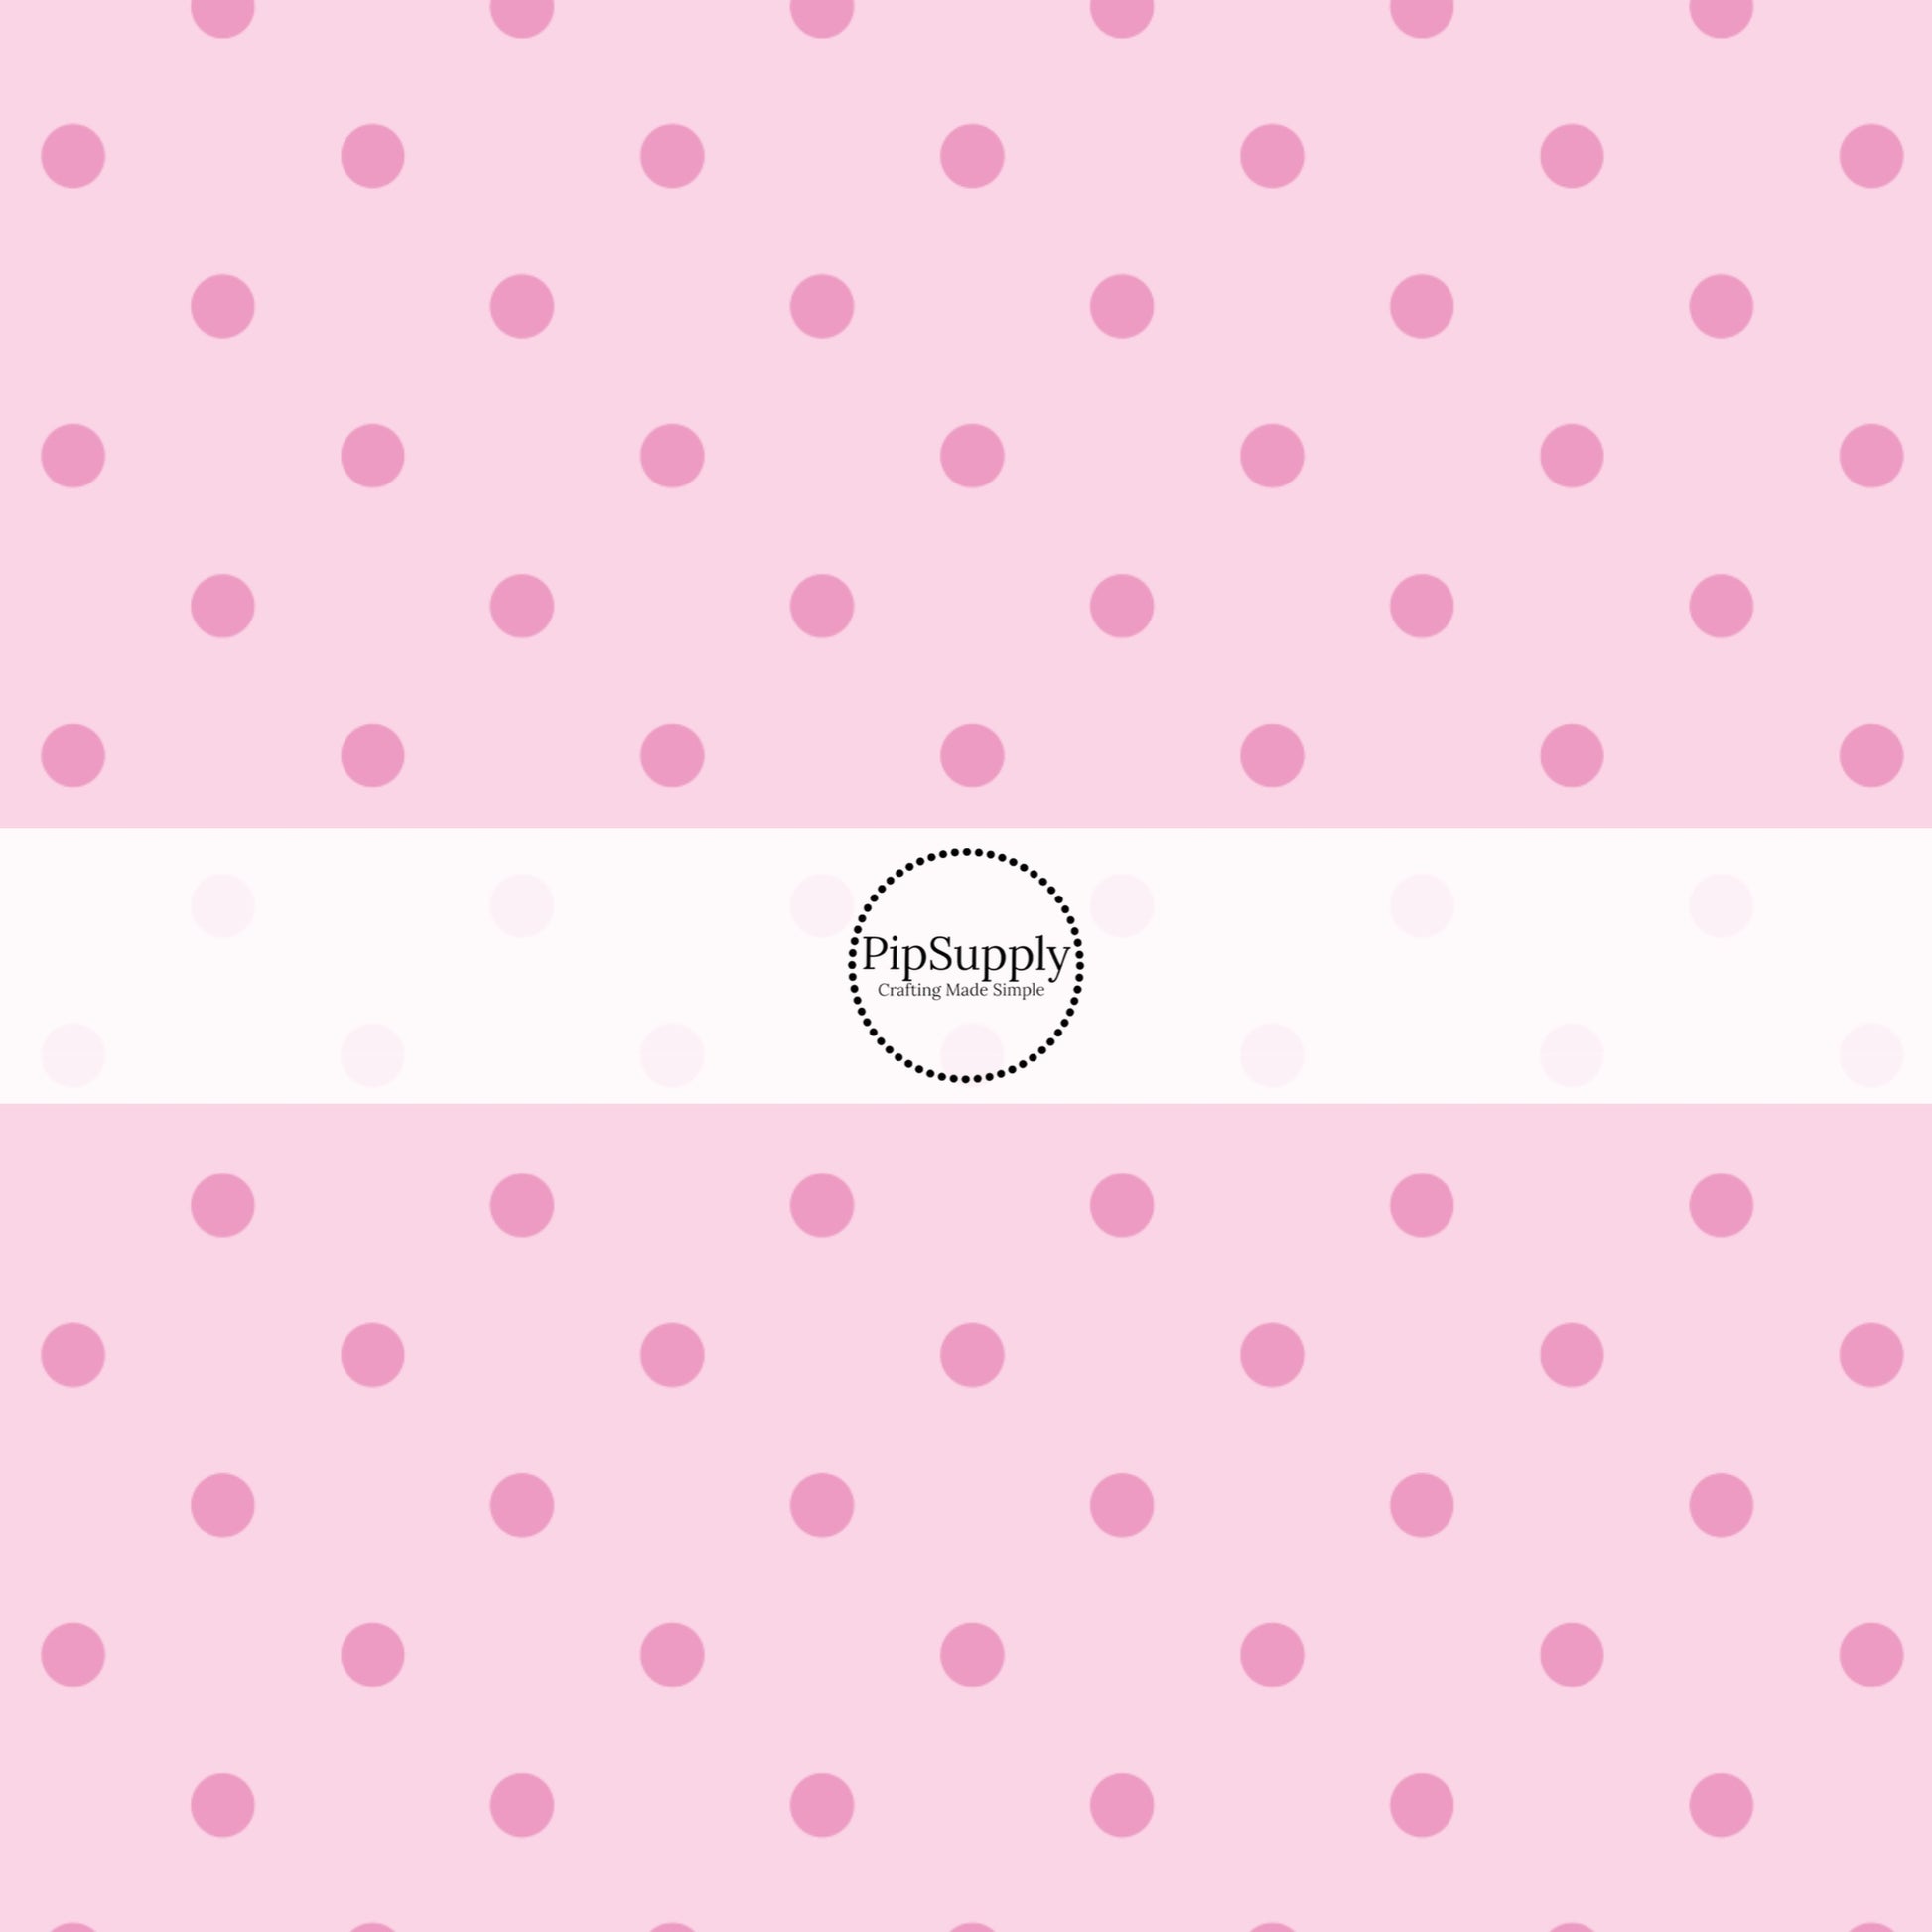 This celebration fabric by the yard features pink dots on light pink. This fun themed fabric can be used for all your sewing and crafting needs!